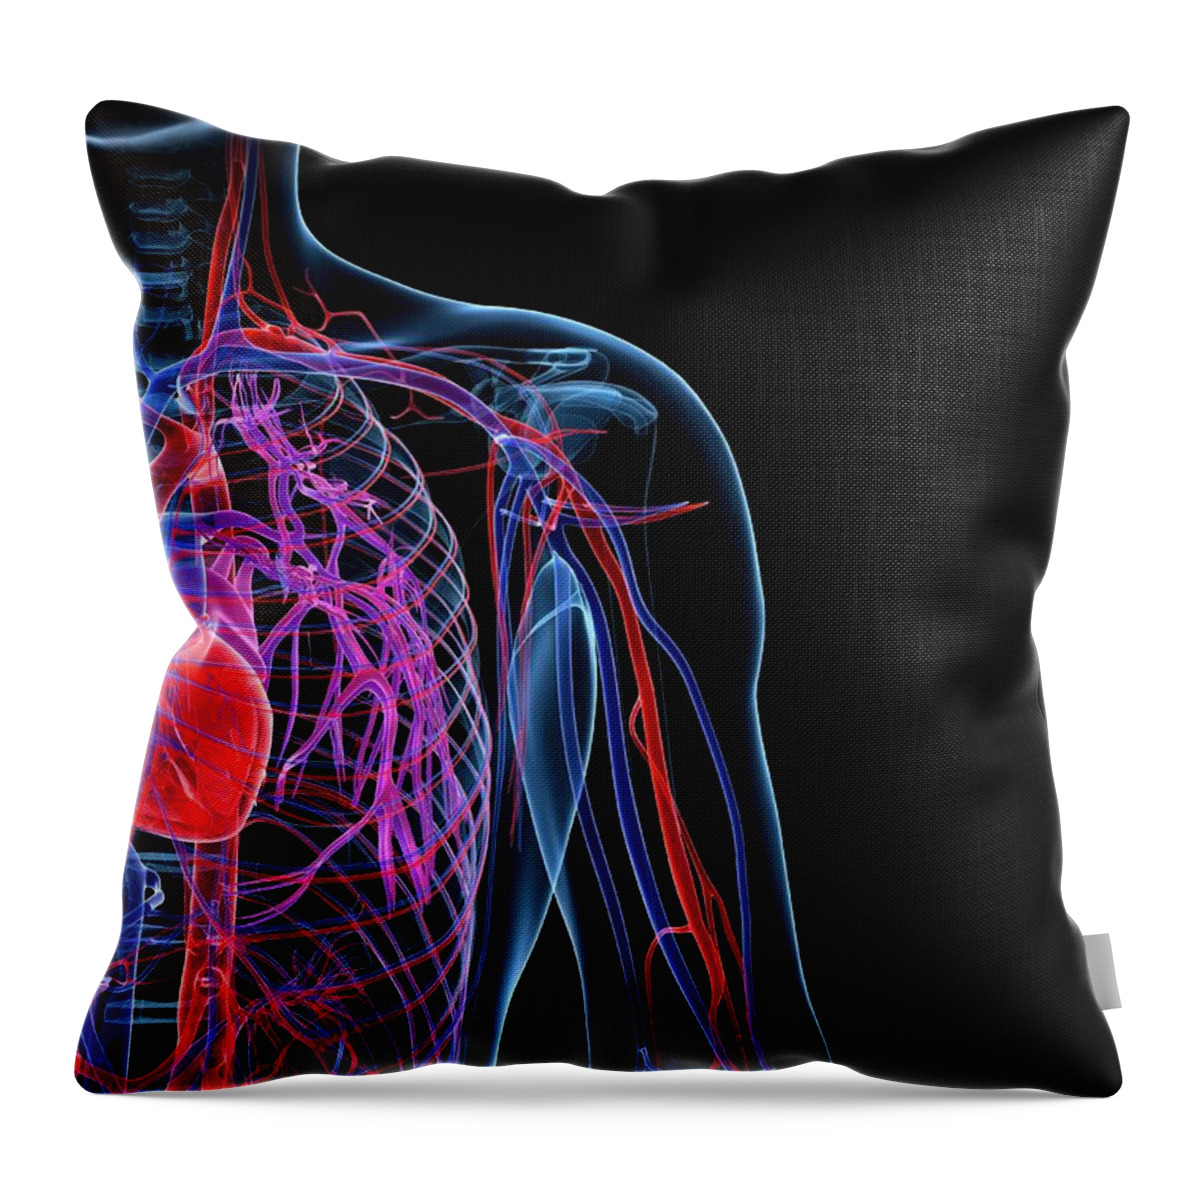 Anatomy Throw Pillow featuring the digital art Male Cardiovascular System, Artwork by Science Photo Library - Sciepro